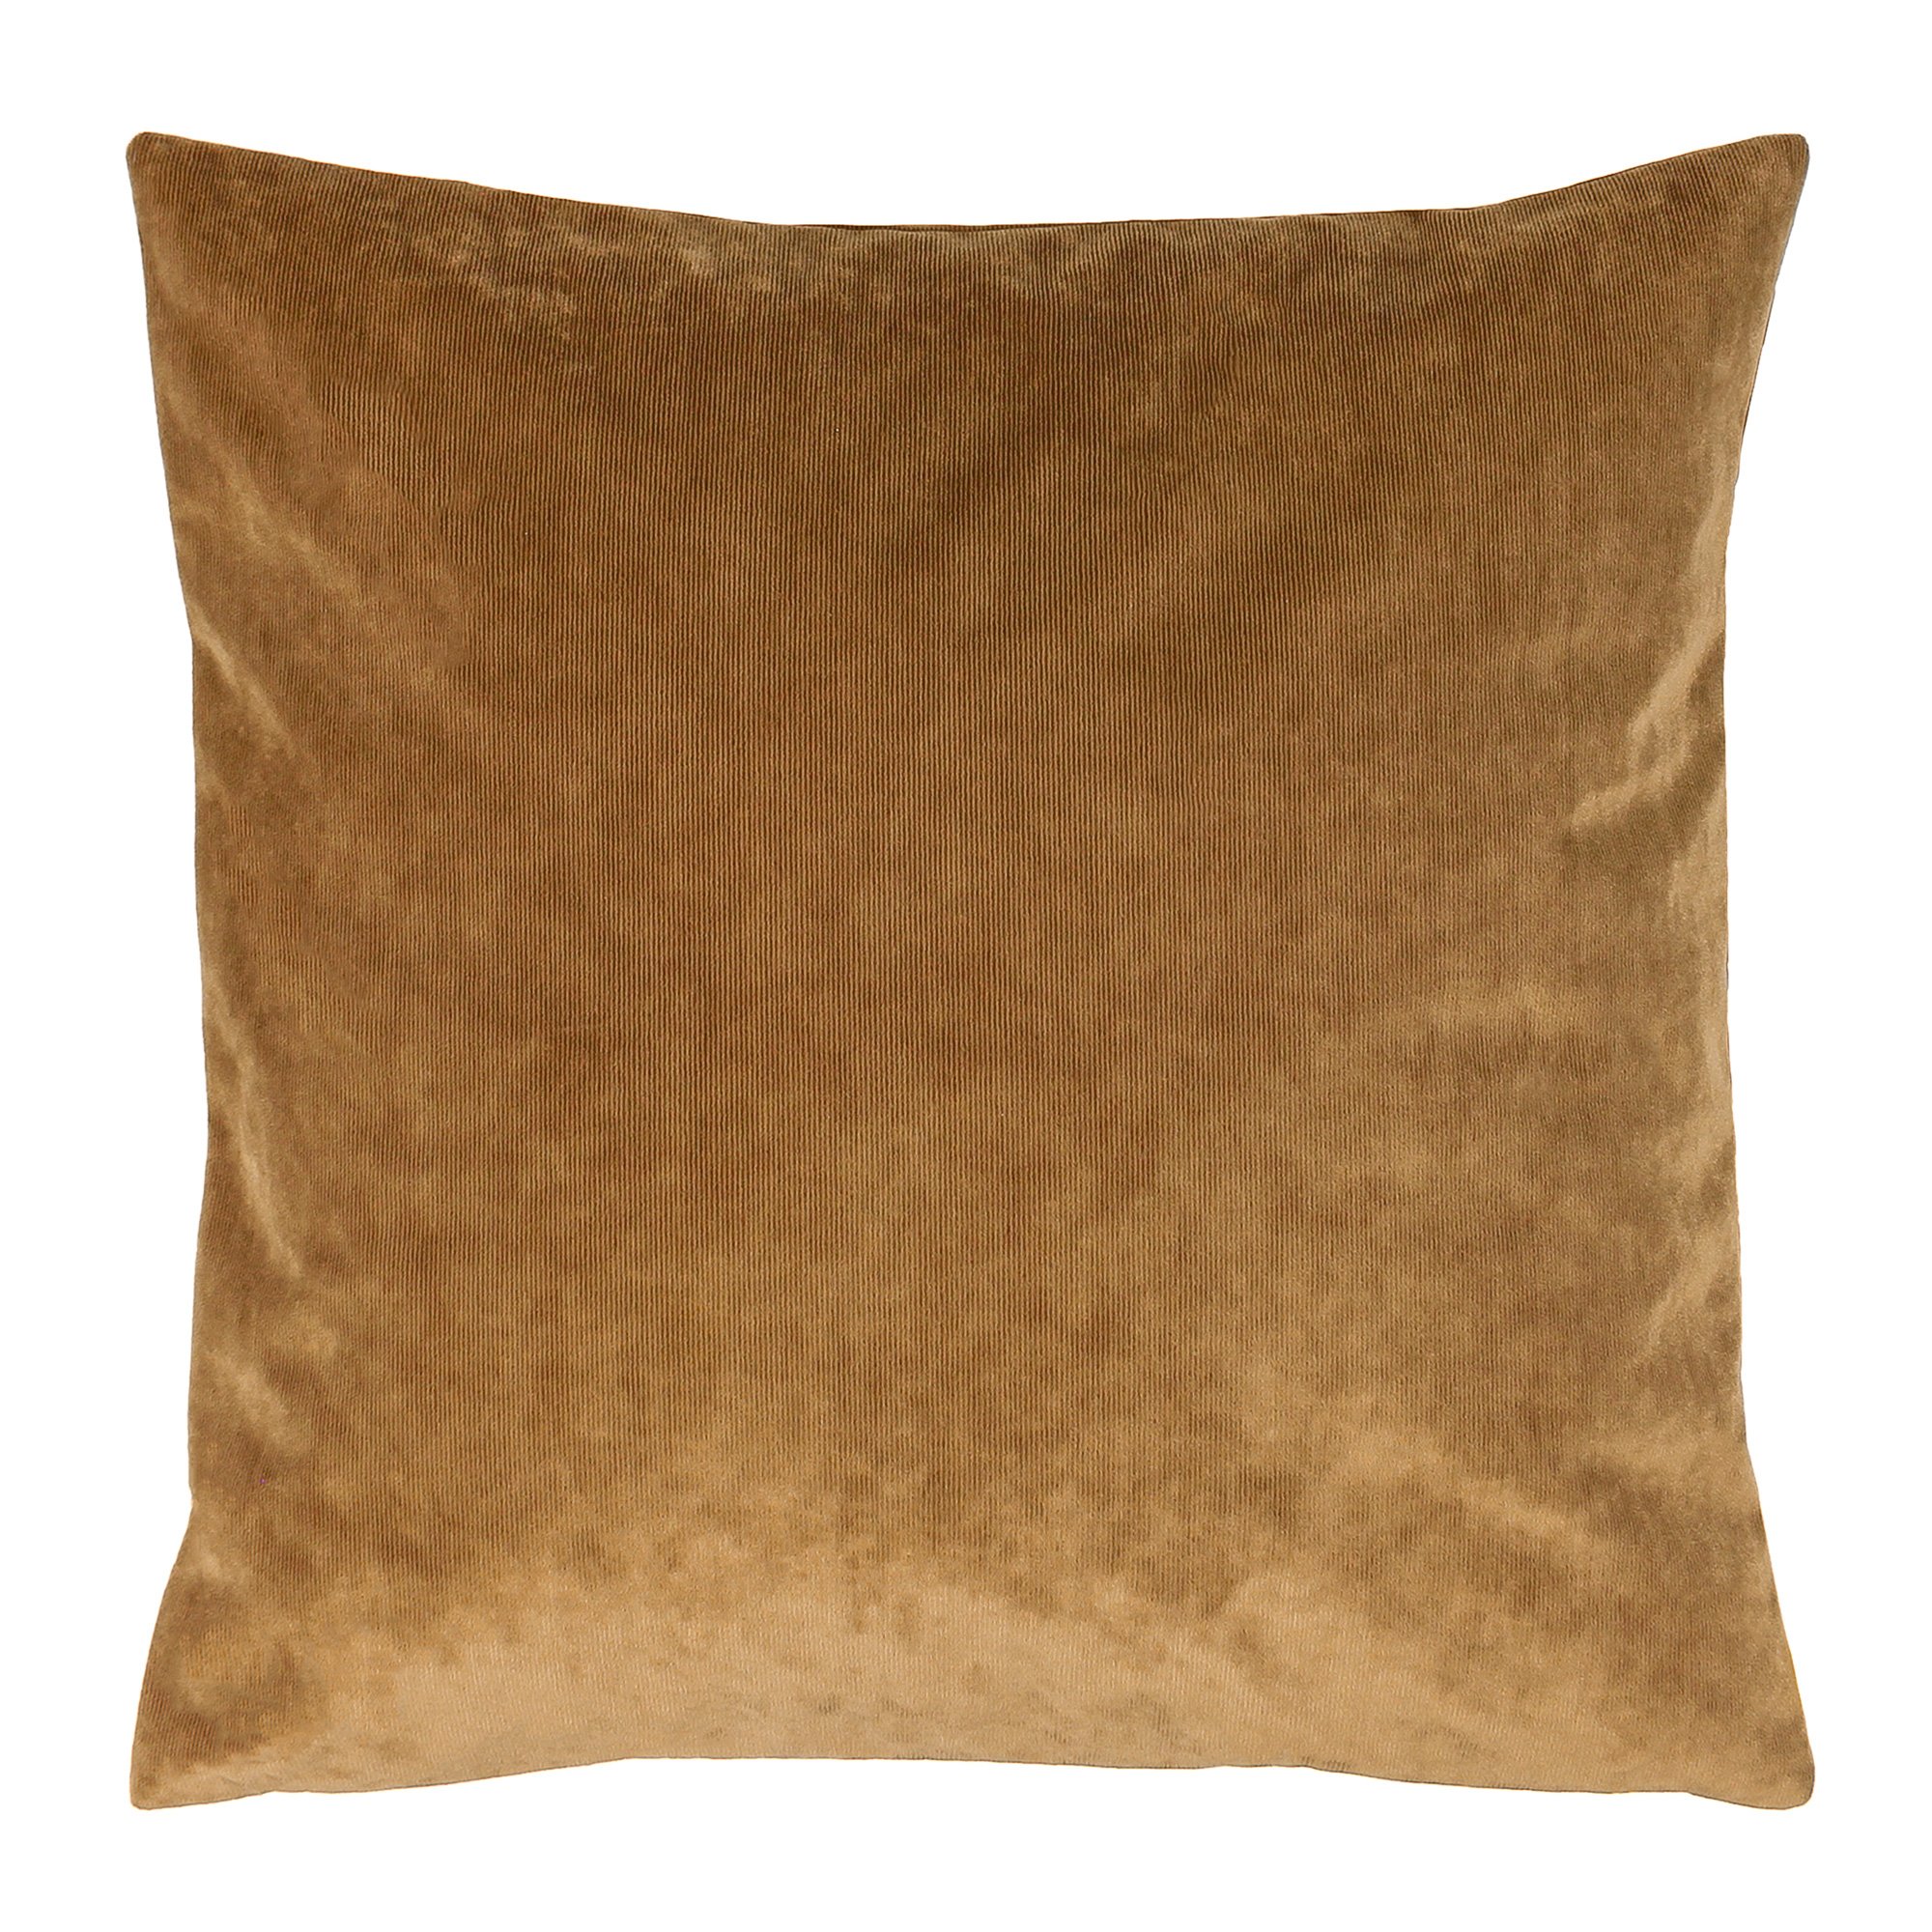 Golden Corduroy Cushion, Square, Brown | Barker & Stonehouse